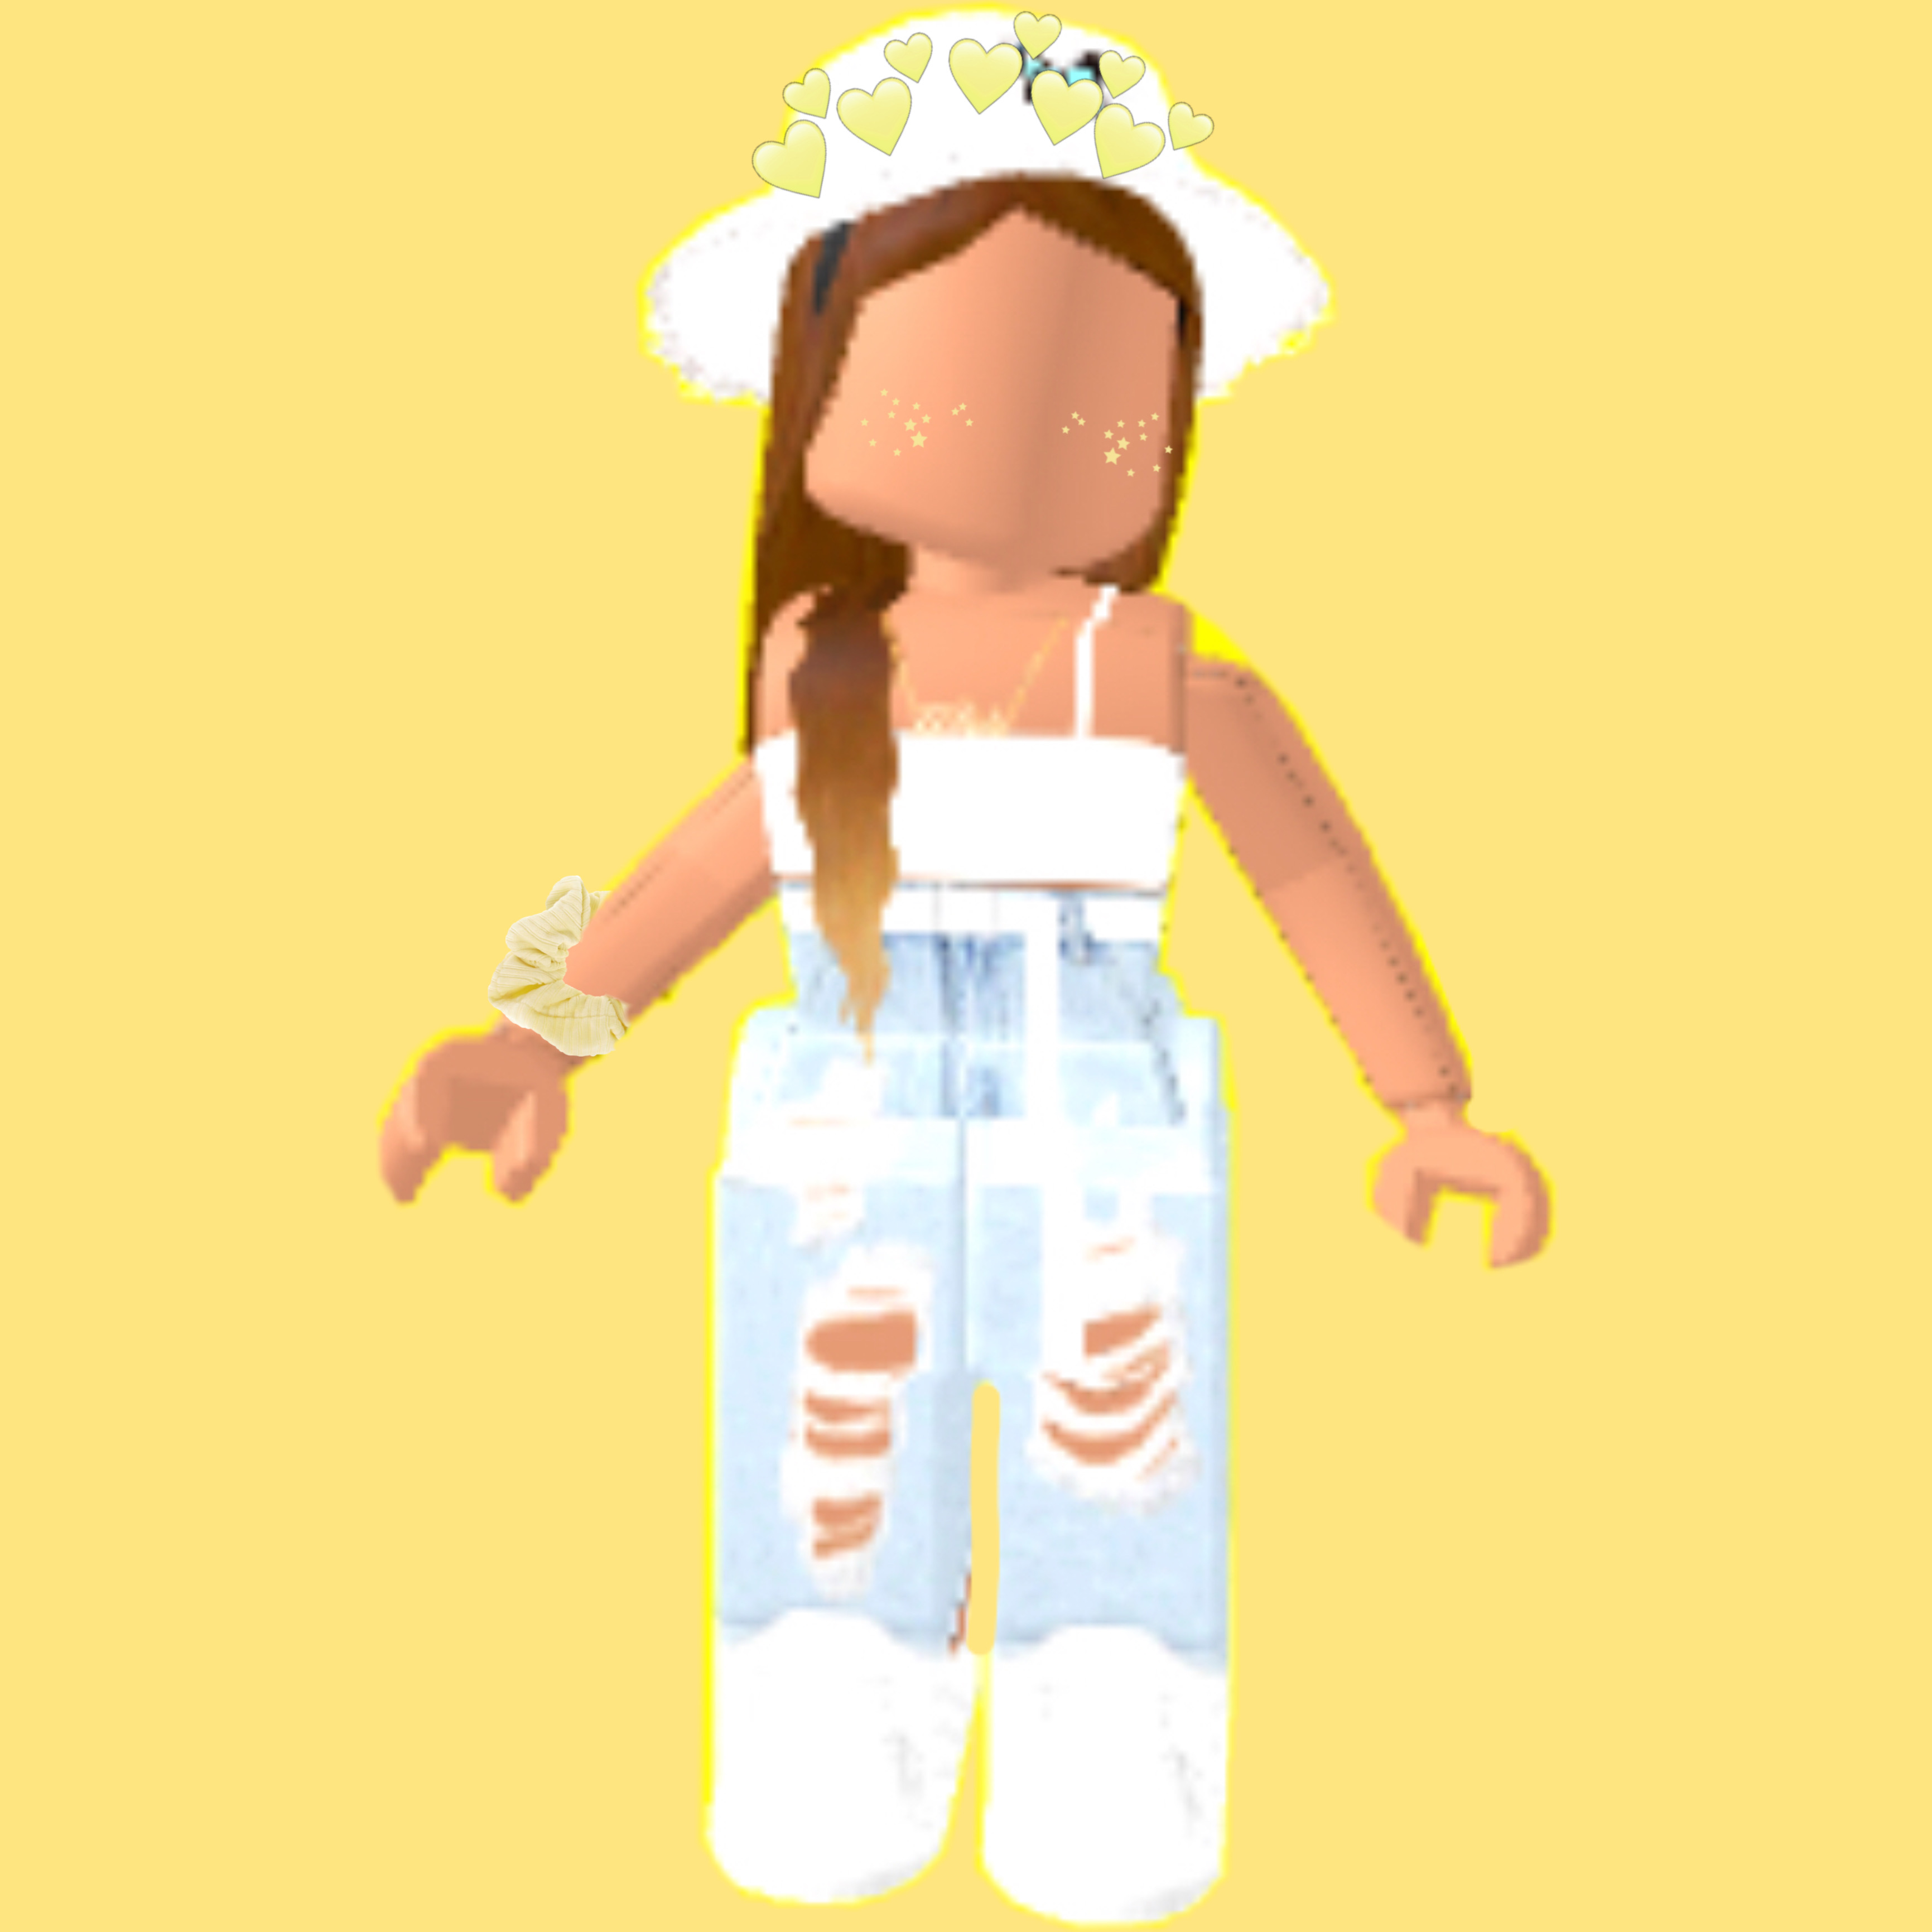 Pastel Gfxroblox Aesthetic Roblox Image By Bella - pastel high quality aesthetic roblox gfx